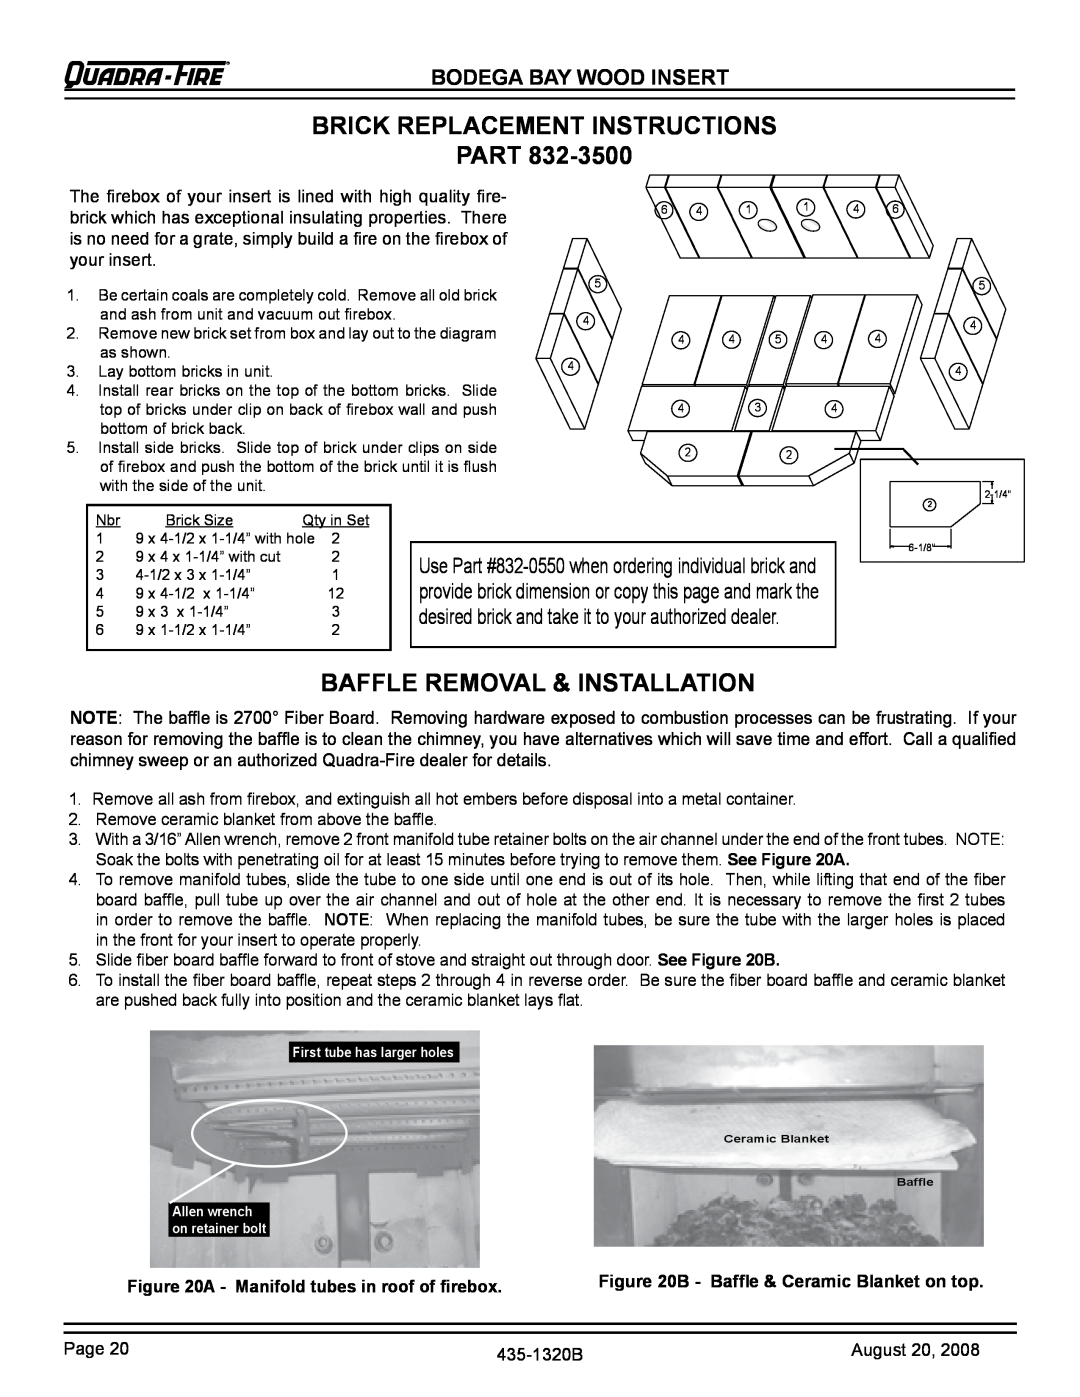 Hearth and Home Technologies BODBAY brick replacement instructions Part, Baffle Removal & Installation 